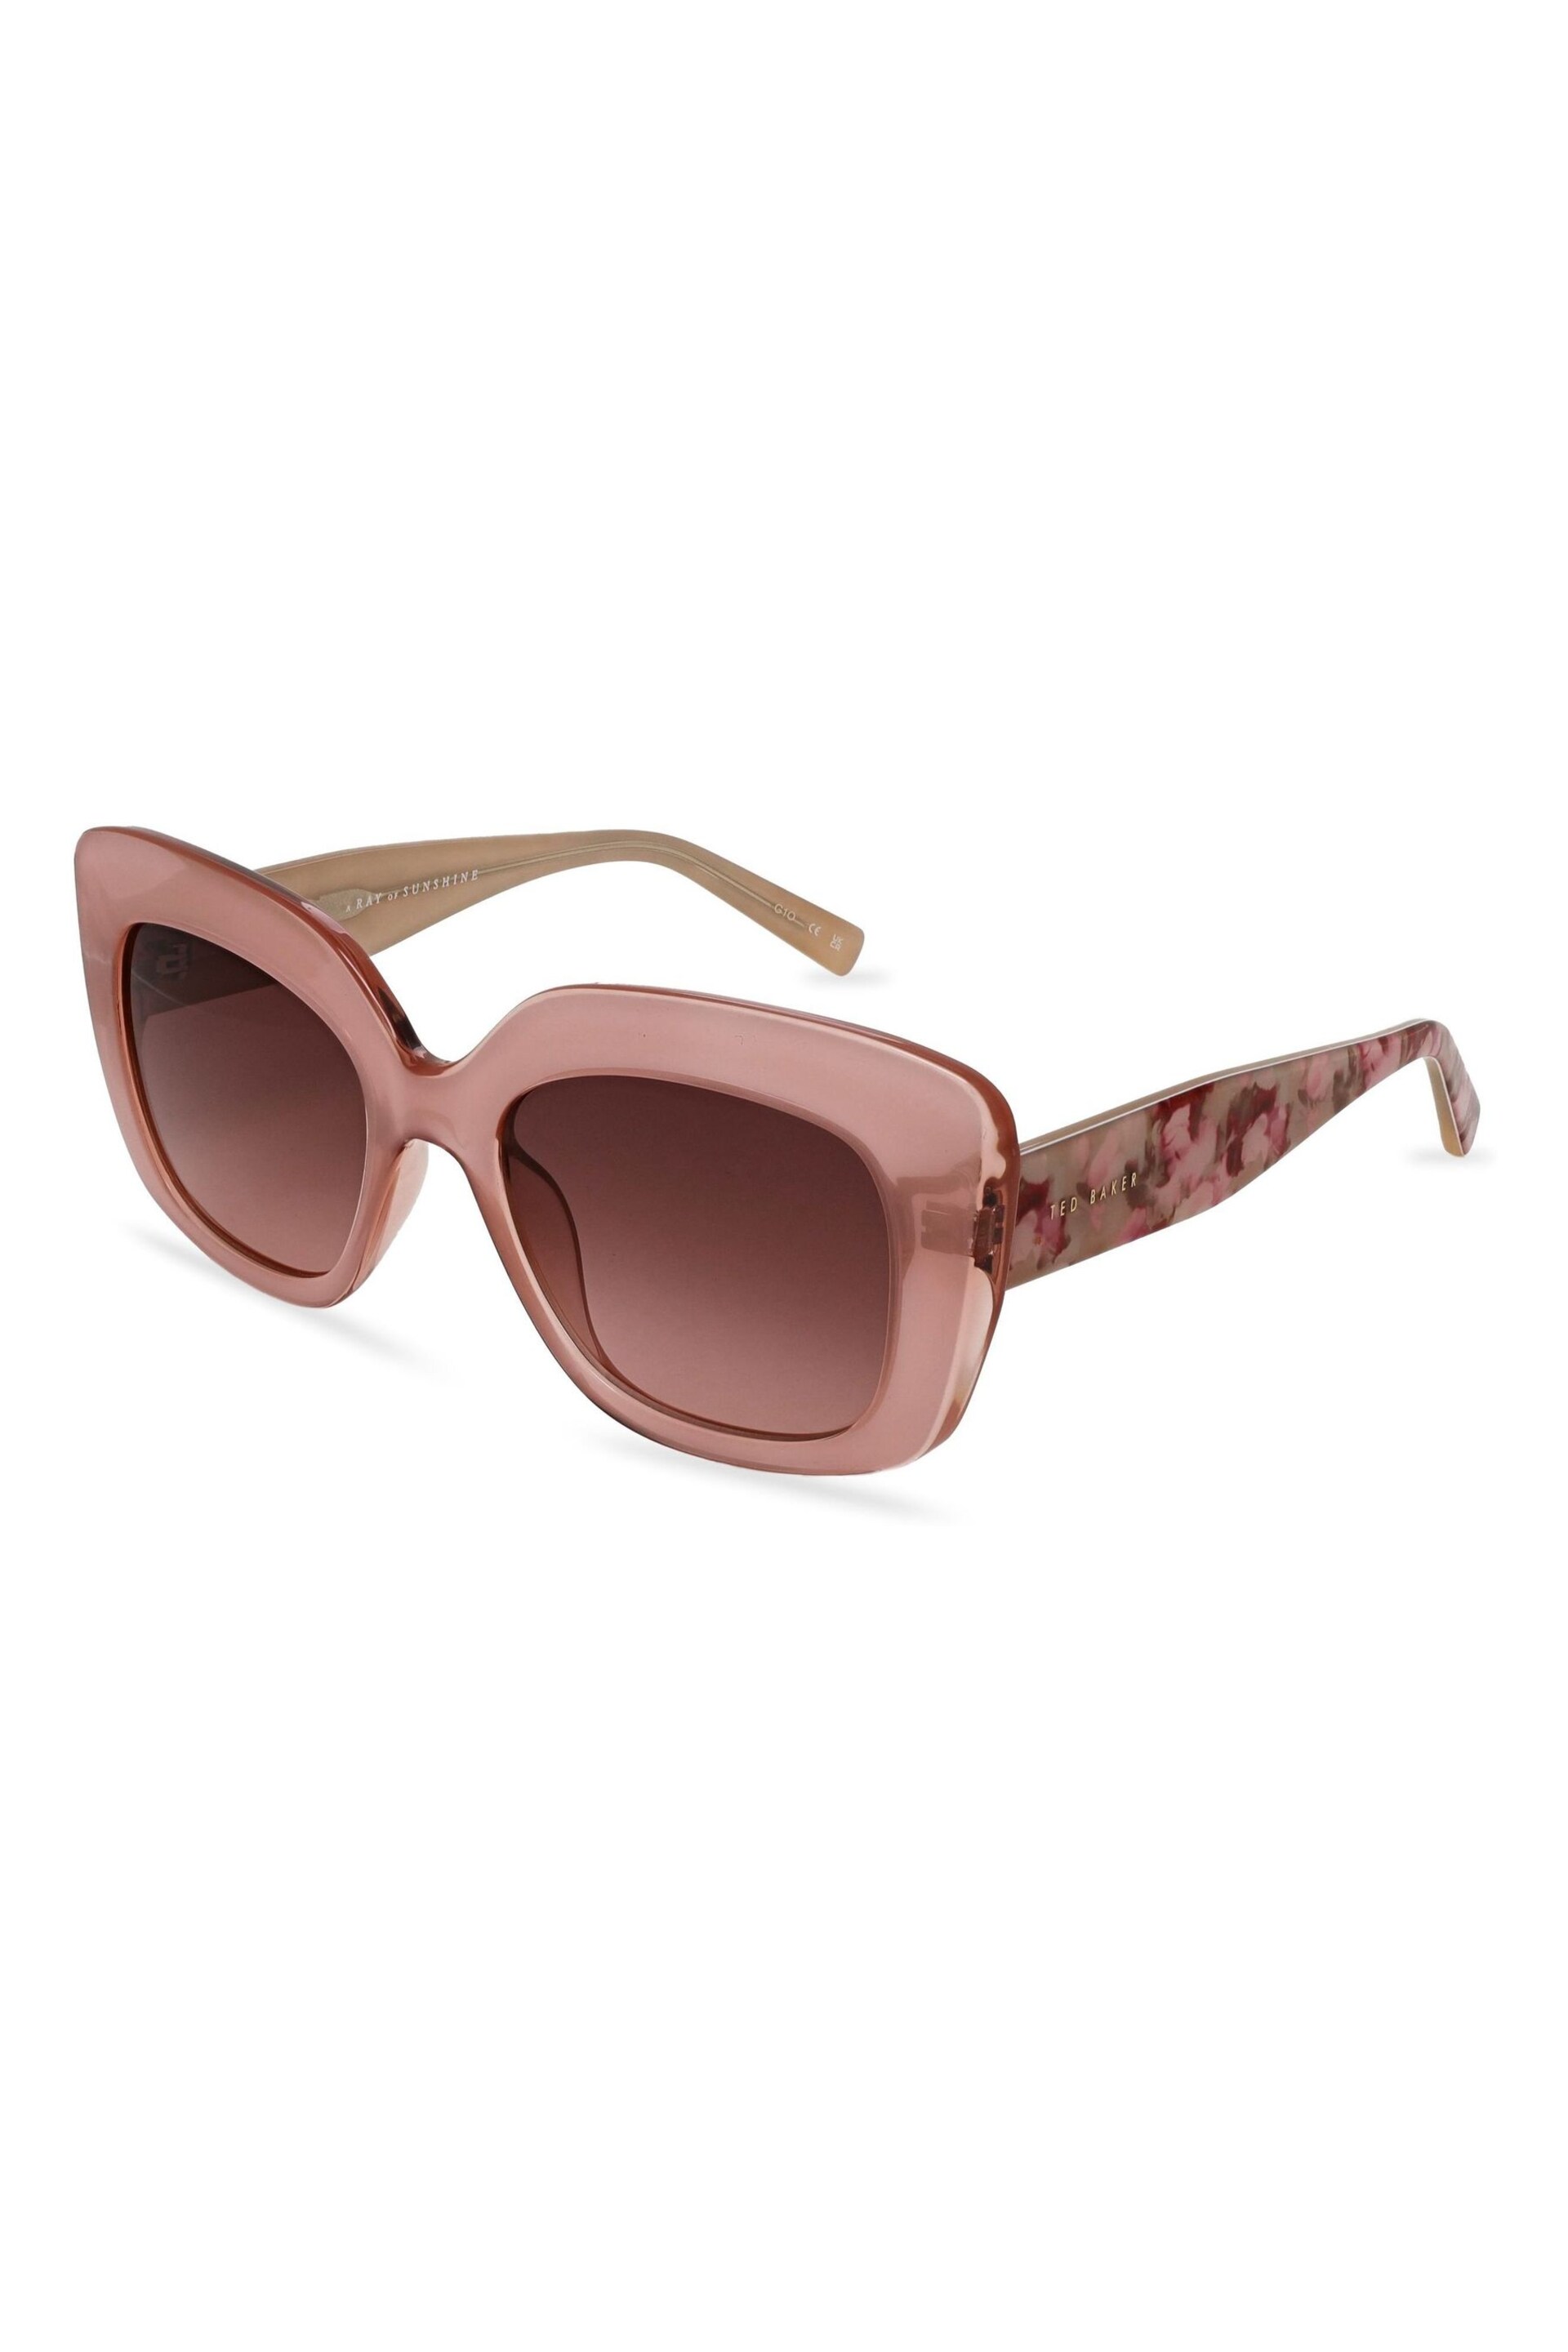 Ted Baker Pink Hattie Sunglasses - Image 1 of 5